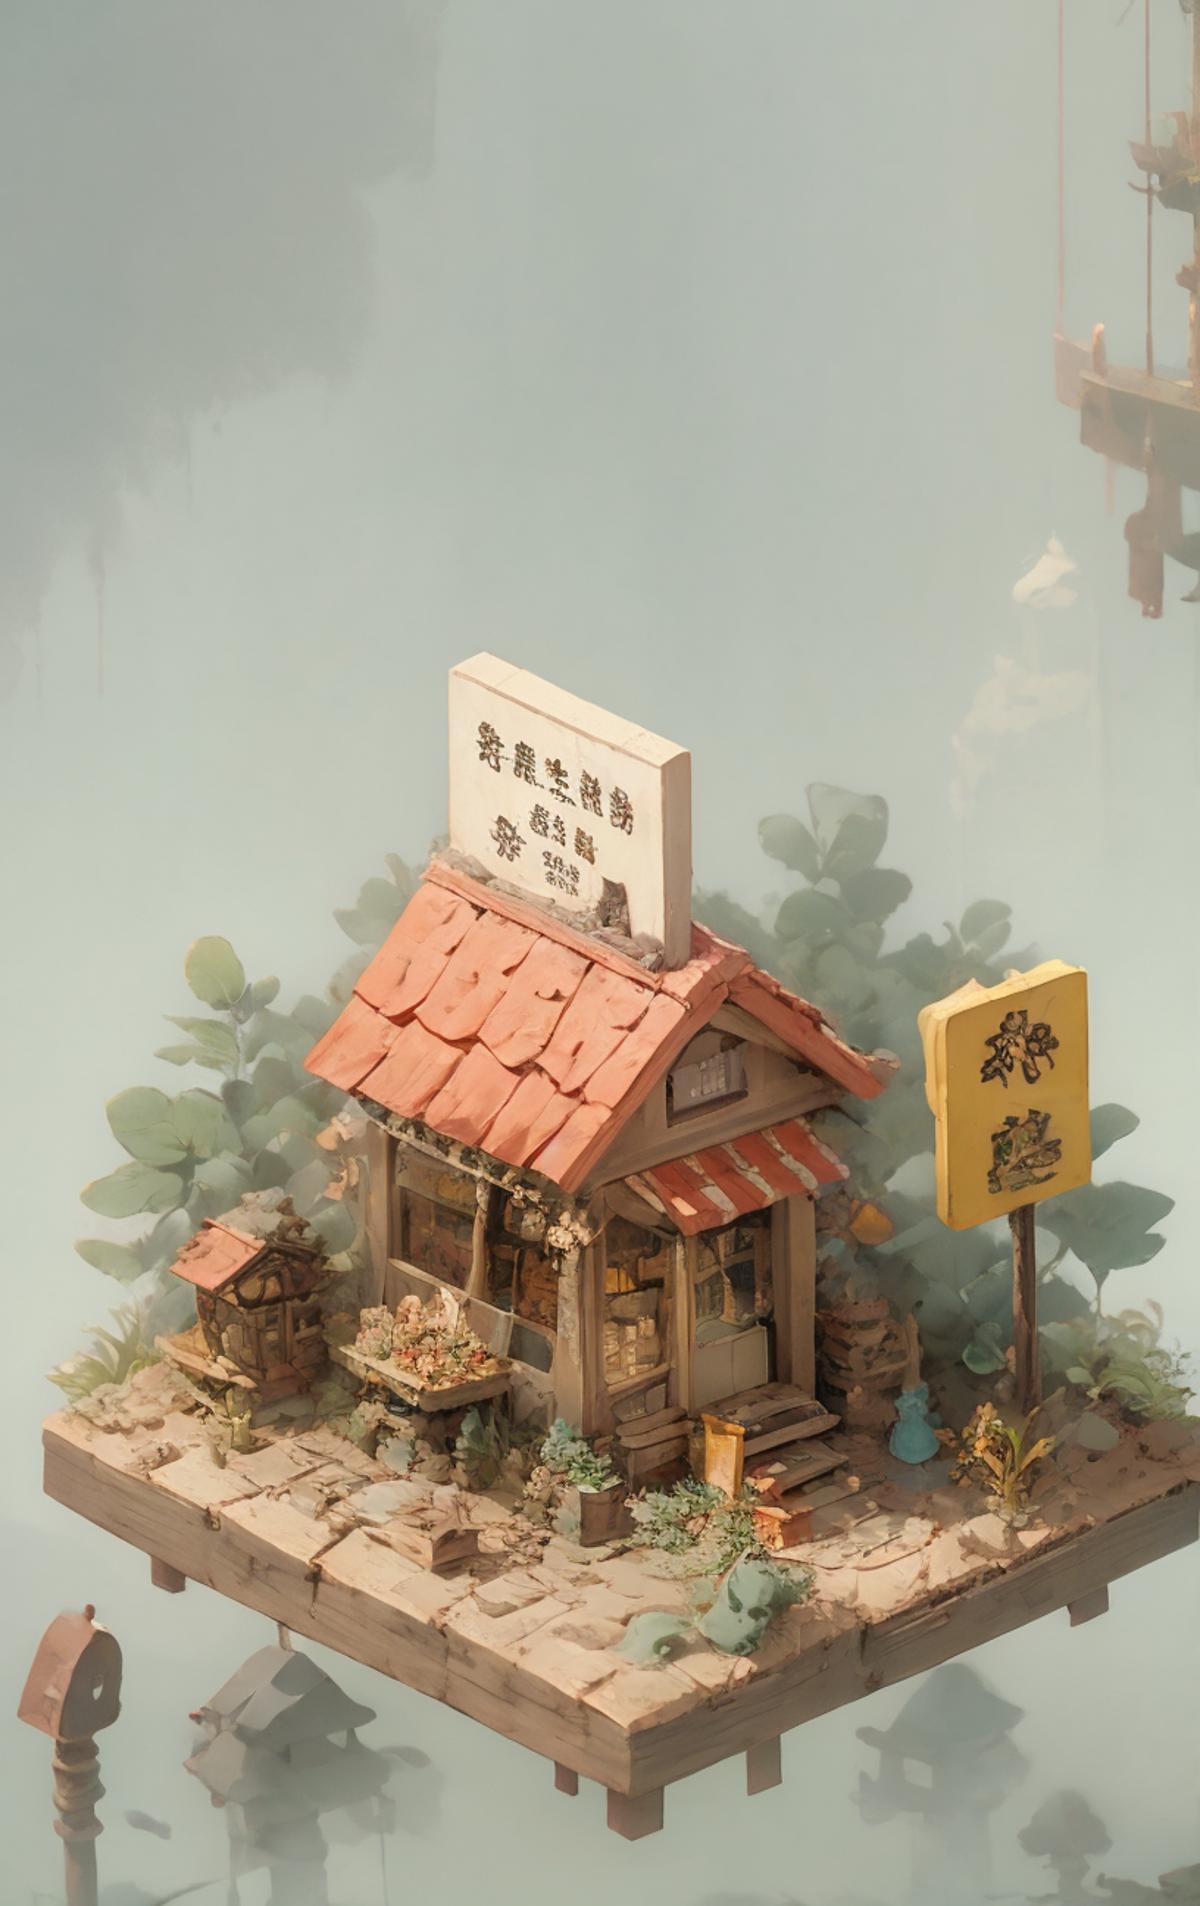 LITTLE HOUSE image by nuaion